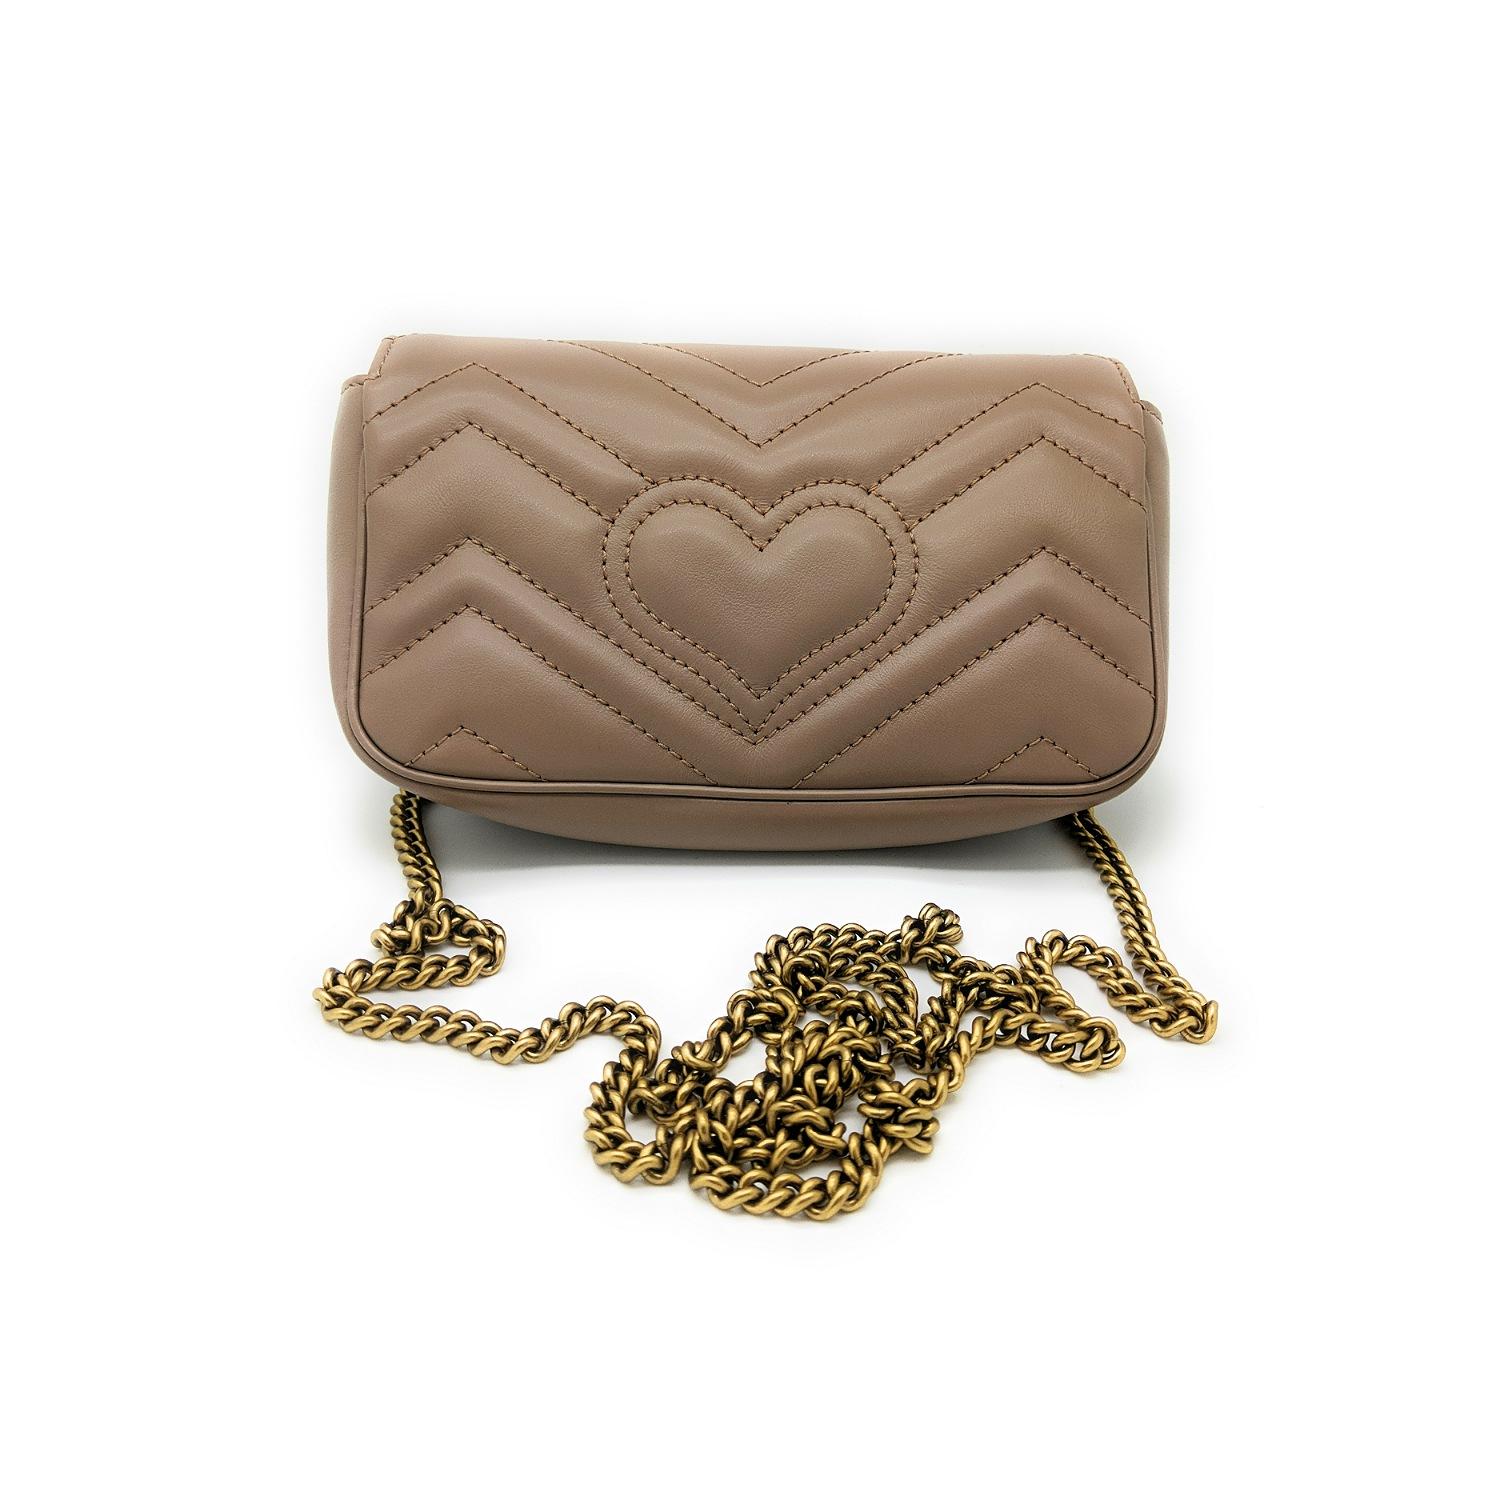 The GG Marmont mini bag has a keyring that can be used to attach it to a separate larger bag. It has a softly structured shape and a flap closure with Double G hardware. The hardware is inspired by an archival design from the '70s. Made in matelassé